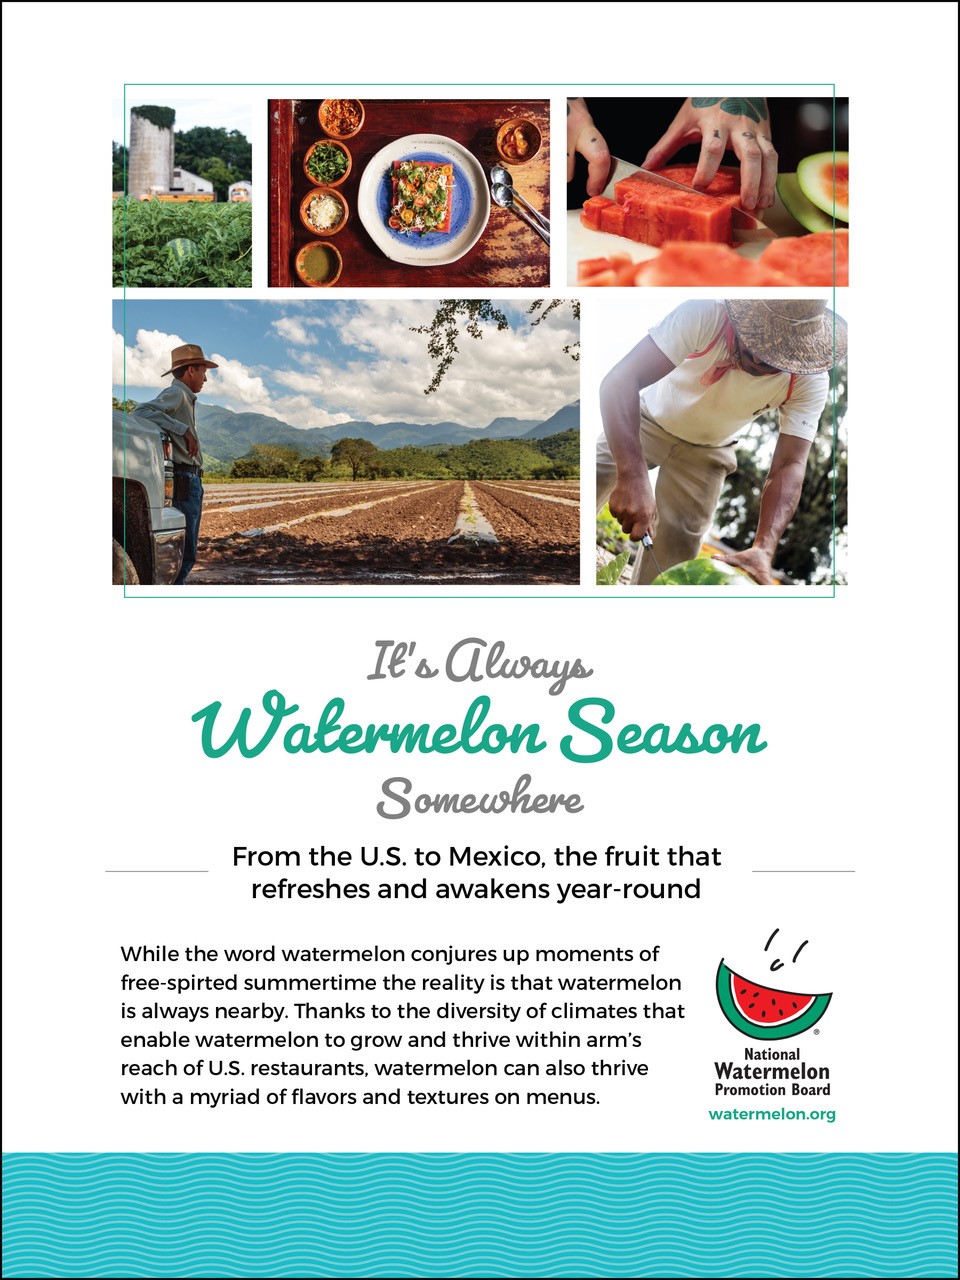 National Watermelon Promotion Board Ad